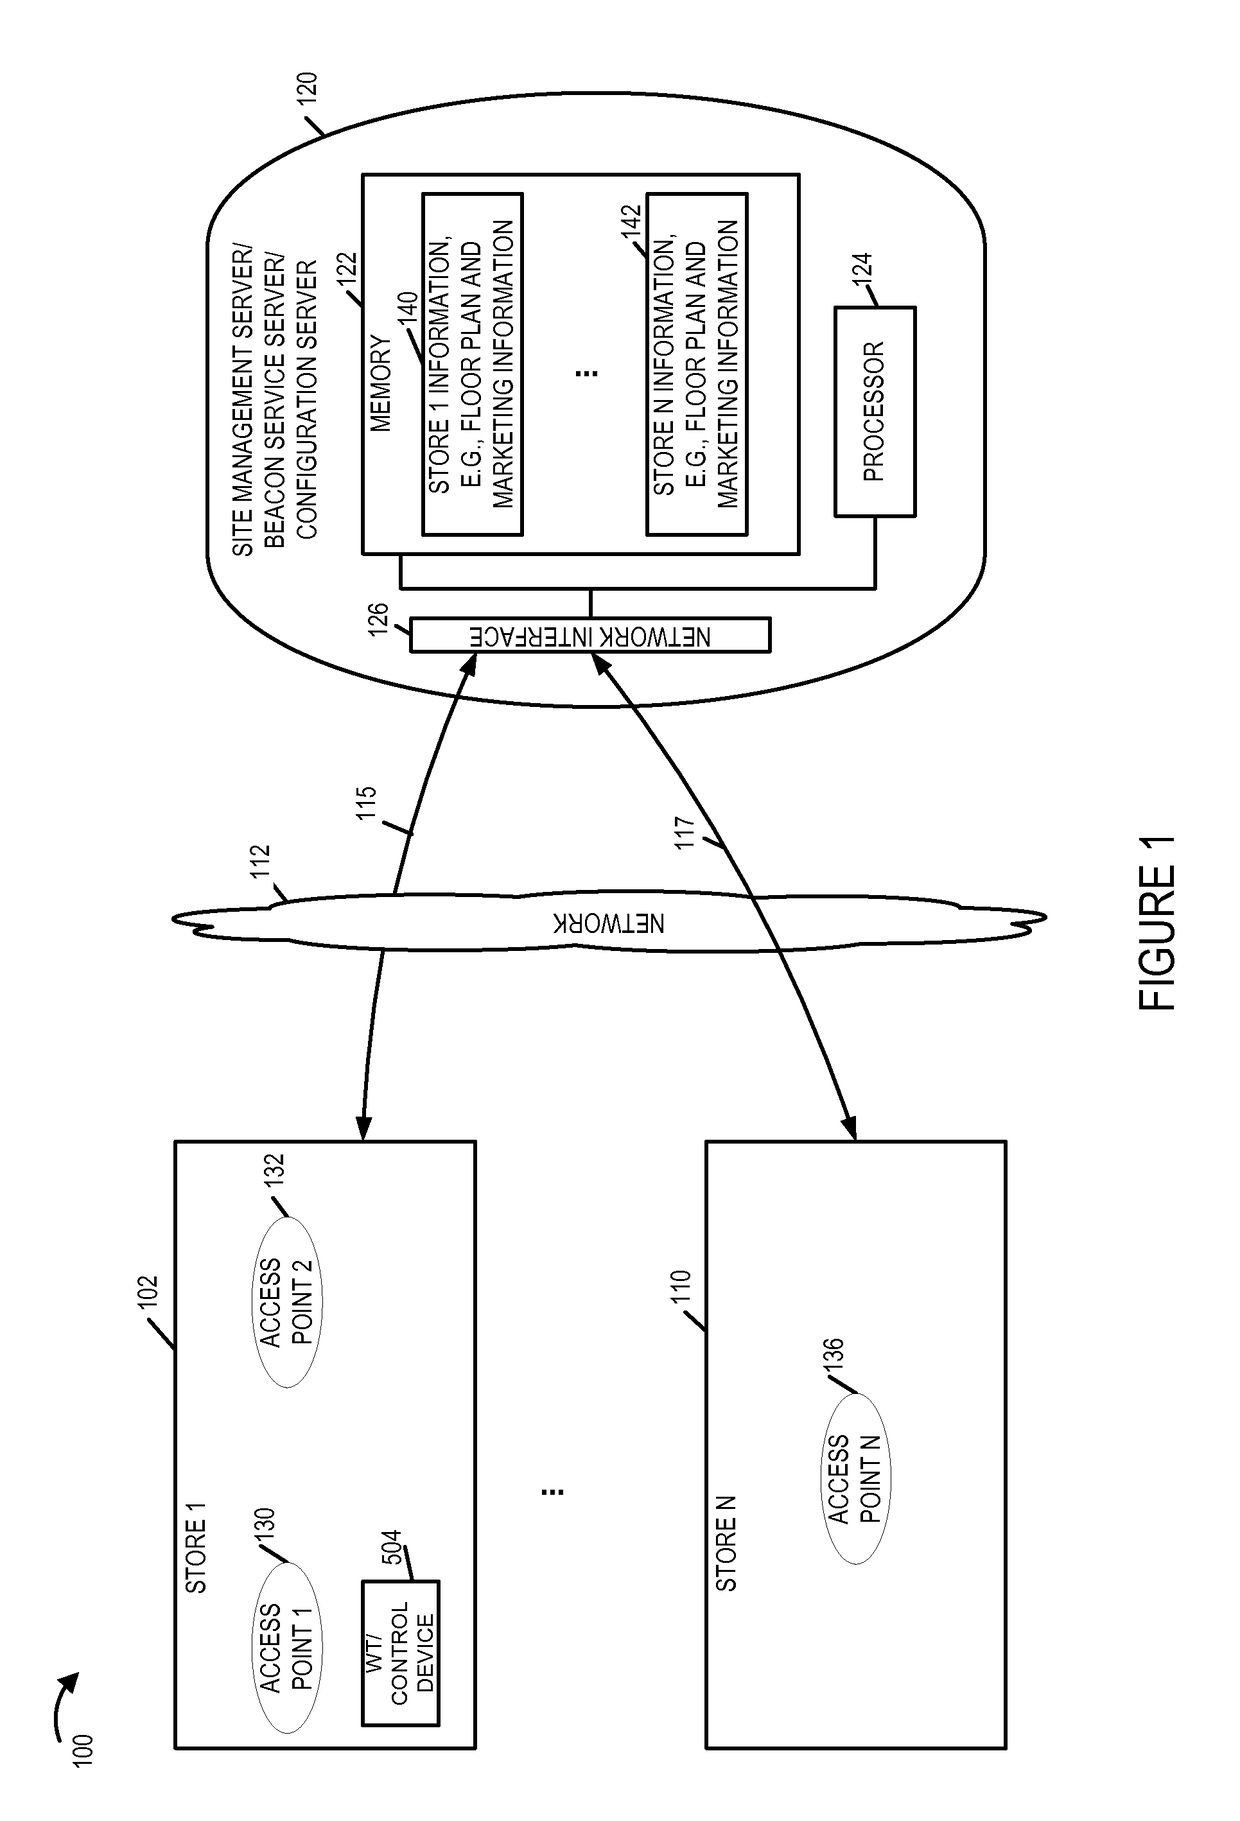 Methods and apparatus for generating, transmitting and/or using beacons